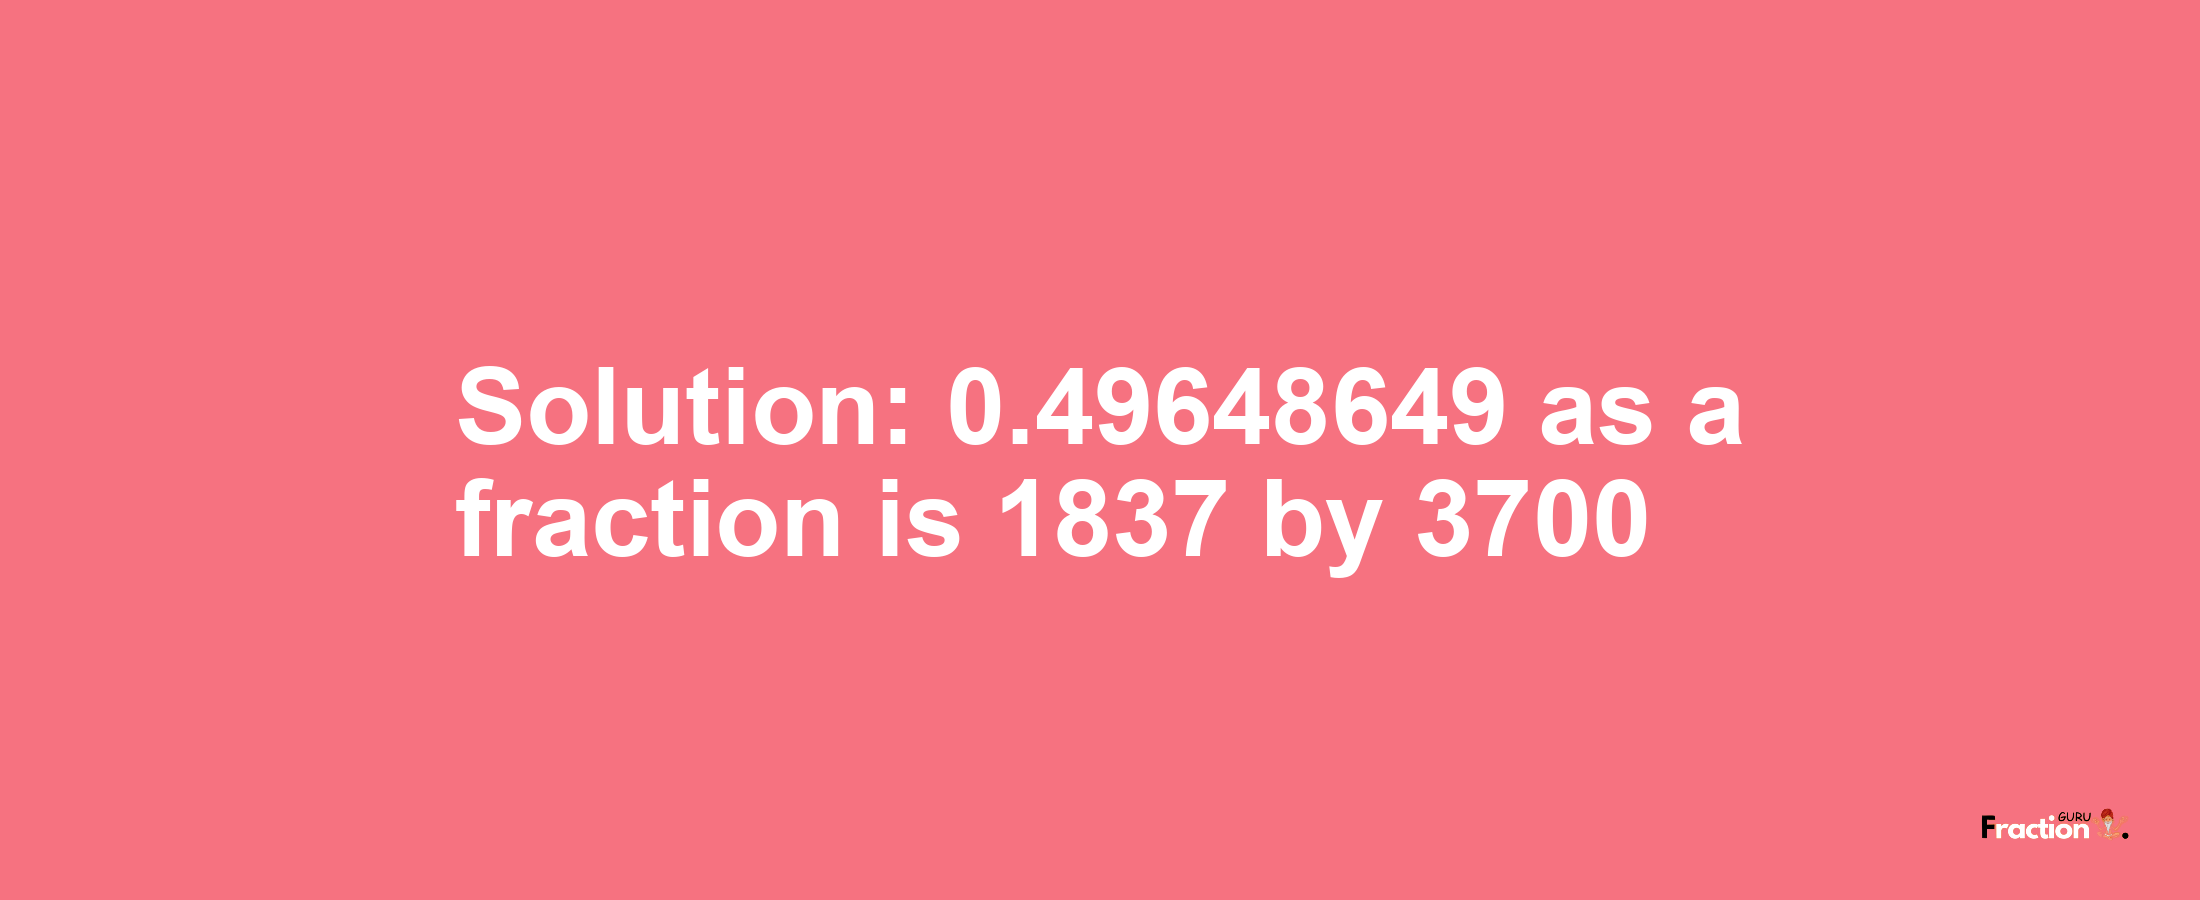 Solution:0.49648649 as a fraction is 1837/3700